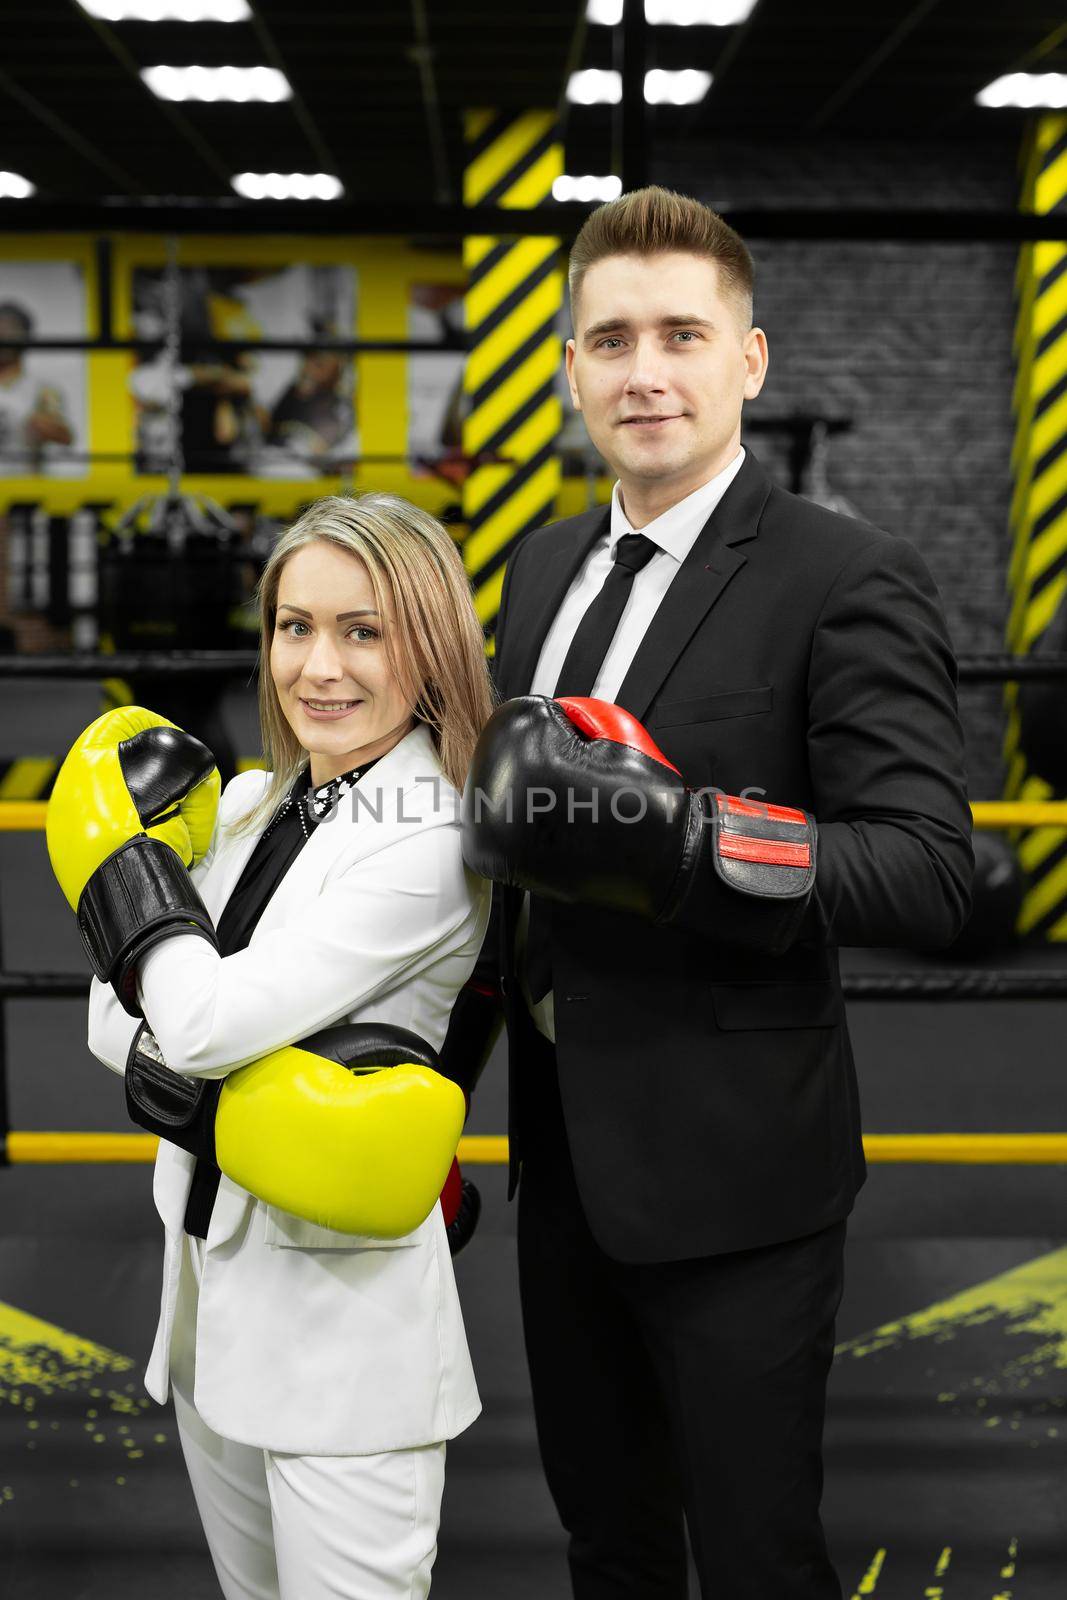 Colleagues, a man and a woman in business suits and boxing gloves in the ring by StudioPeace